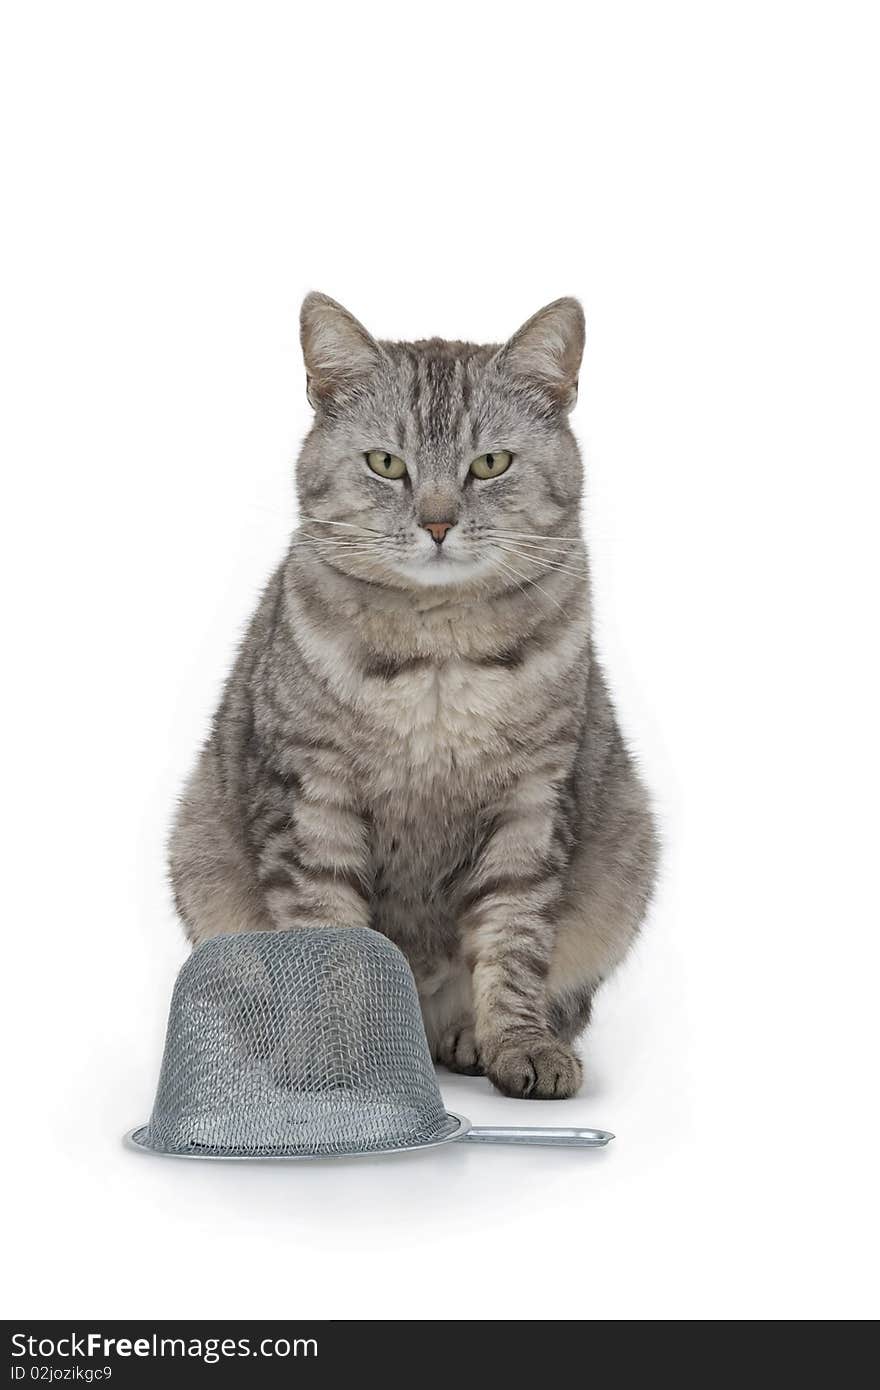 Cat with trap waiting for bag on white background.